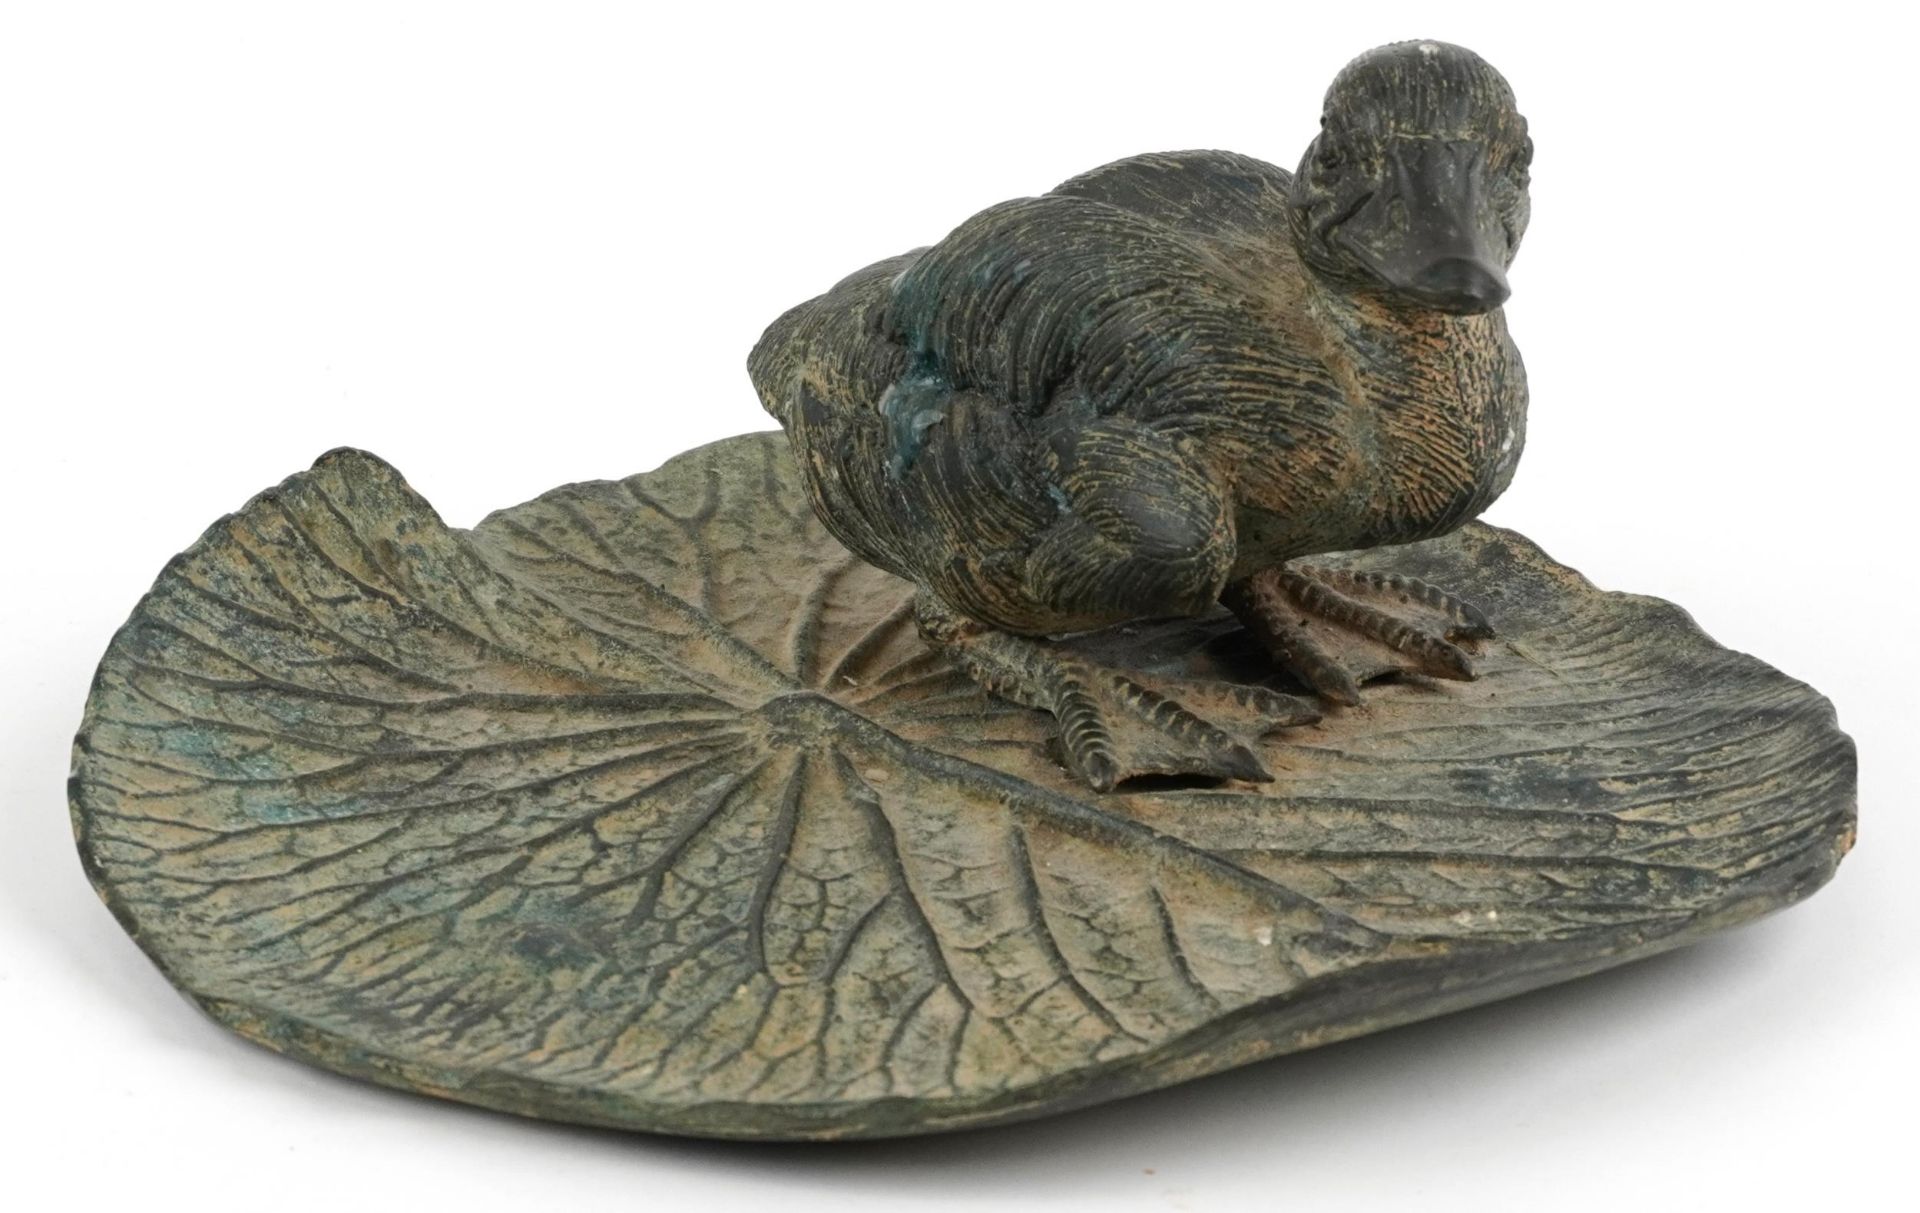 Verdigris patinated bronze sculpture of a duckling on lily pad, 23cm in length : For further